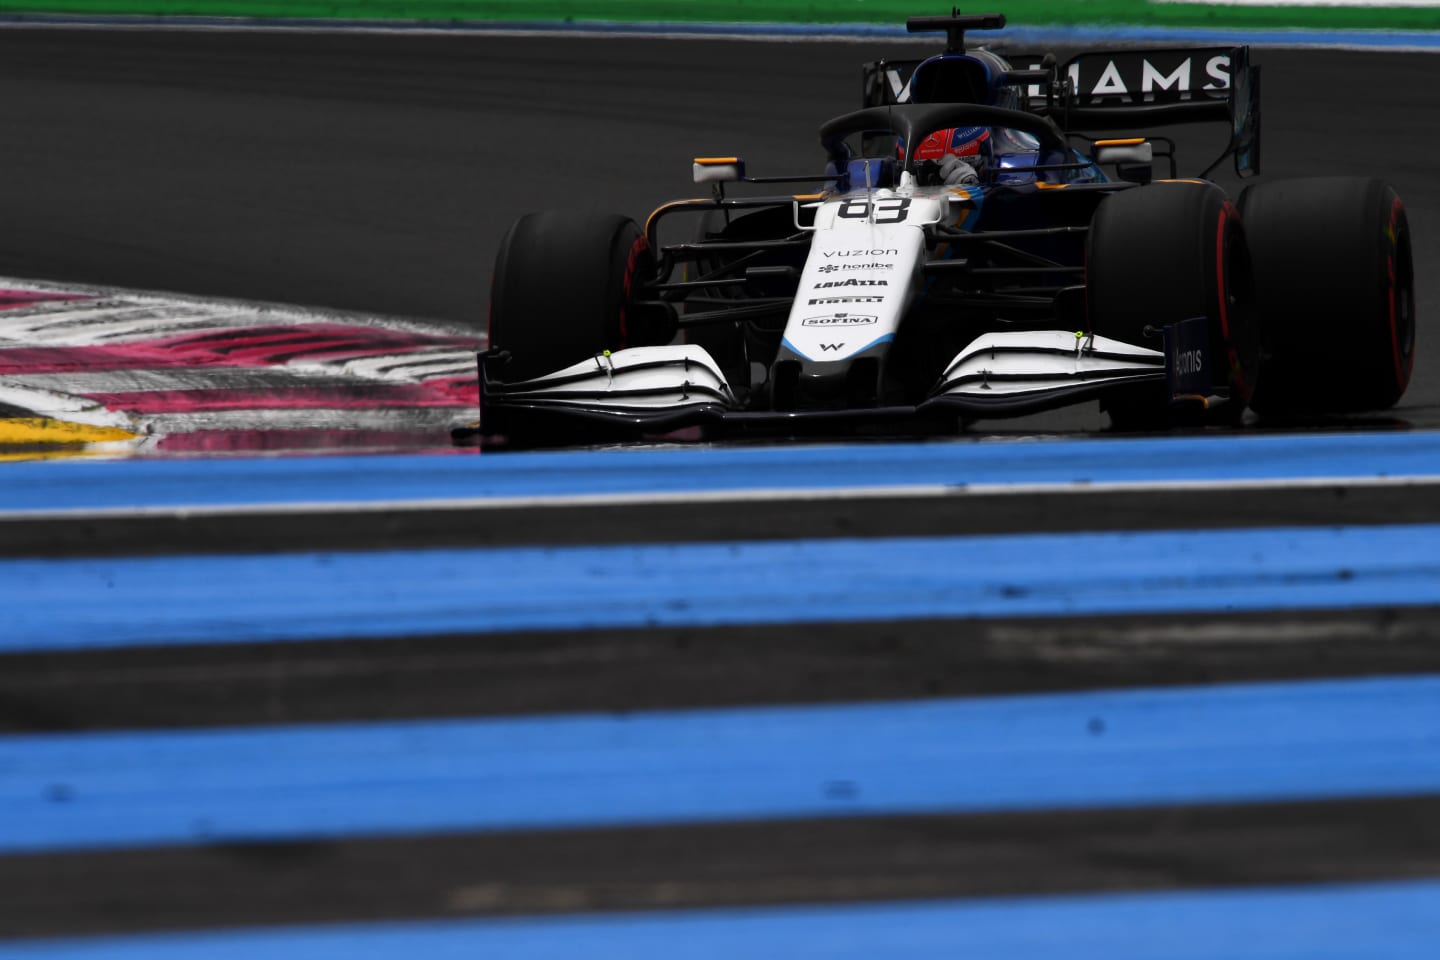 LE CASTELLET, FRANCE - JUNE 19: George Russell of Great Britain driving the (63) Williams Racing FW43B Mercedes on track during final practice ahead of the F1 Grand Prix of France at Circuit Paul Ricard on June 19, 2021 in Le Castellet, France. (Photo by Rudy Carezzevoli/Getty Images)